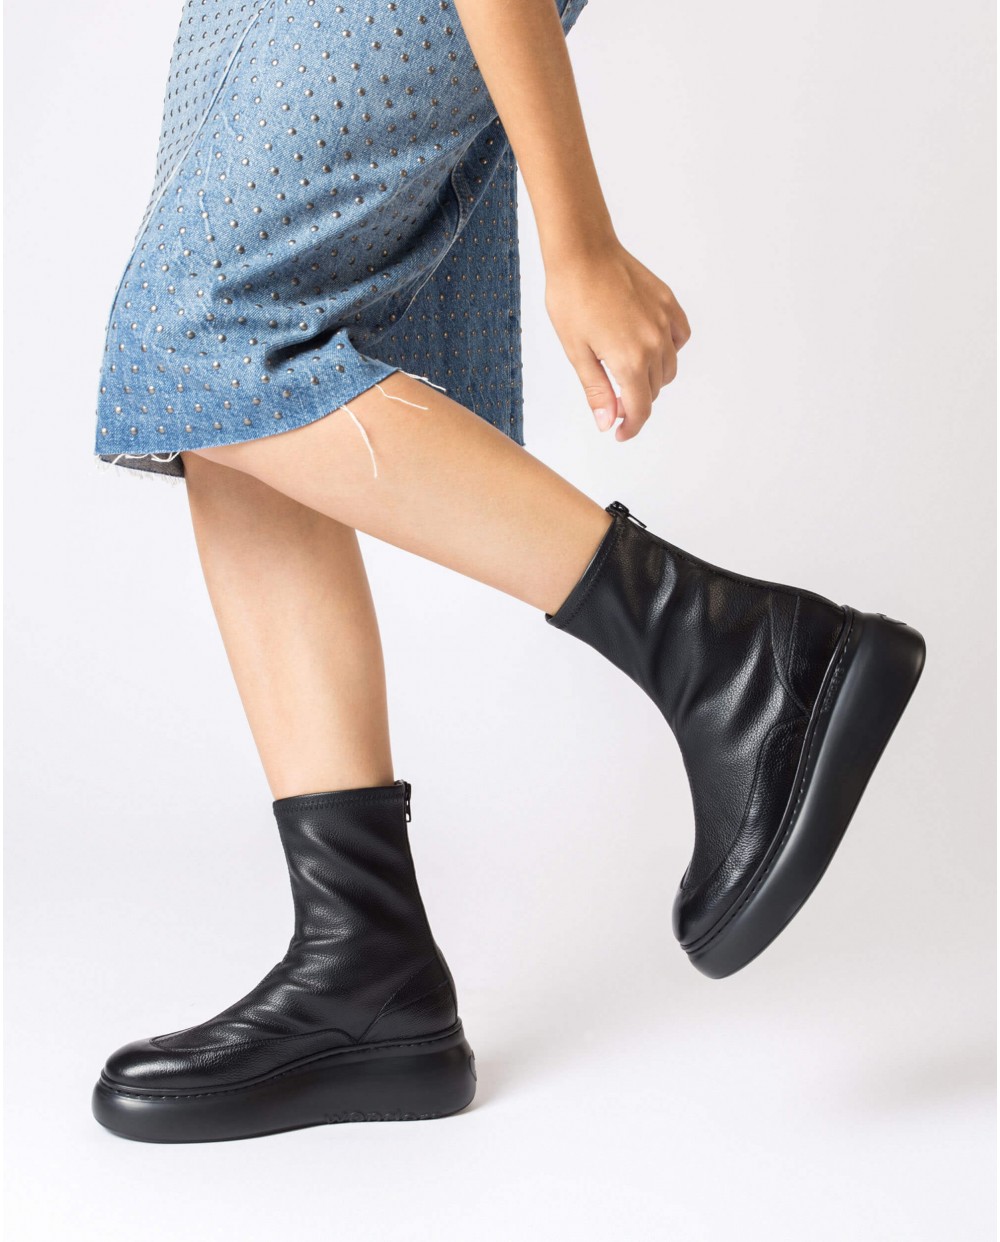 Wonders-Ankle Boots-Black Yuri ankle boot